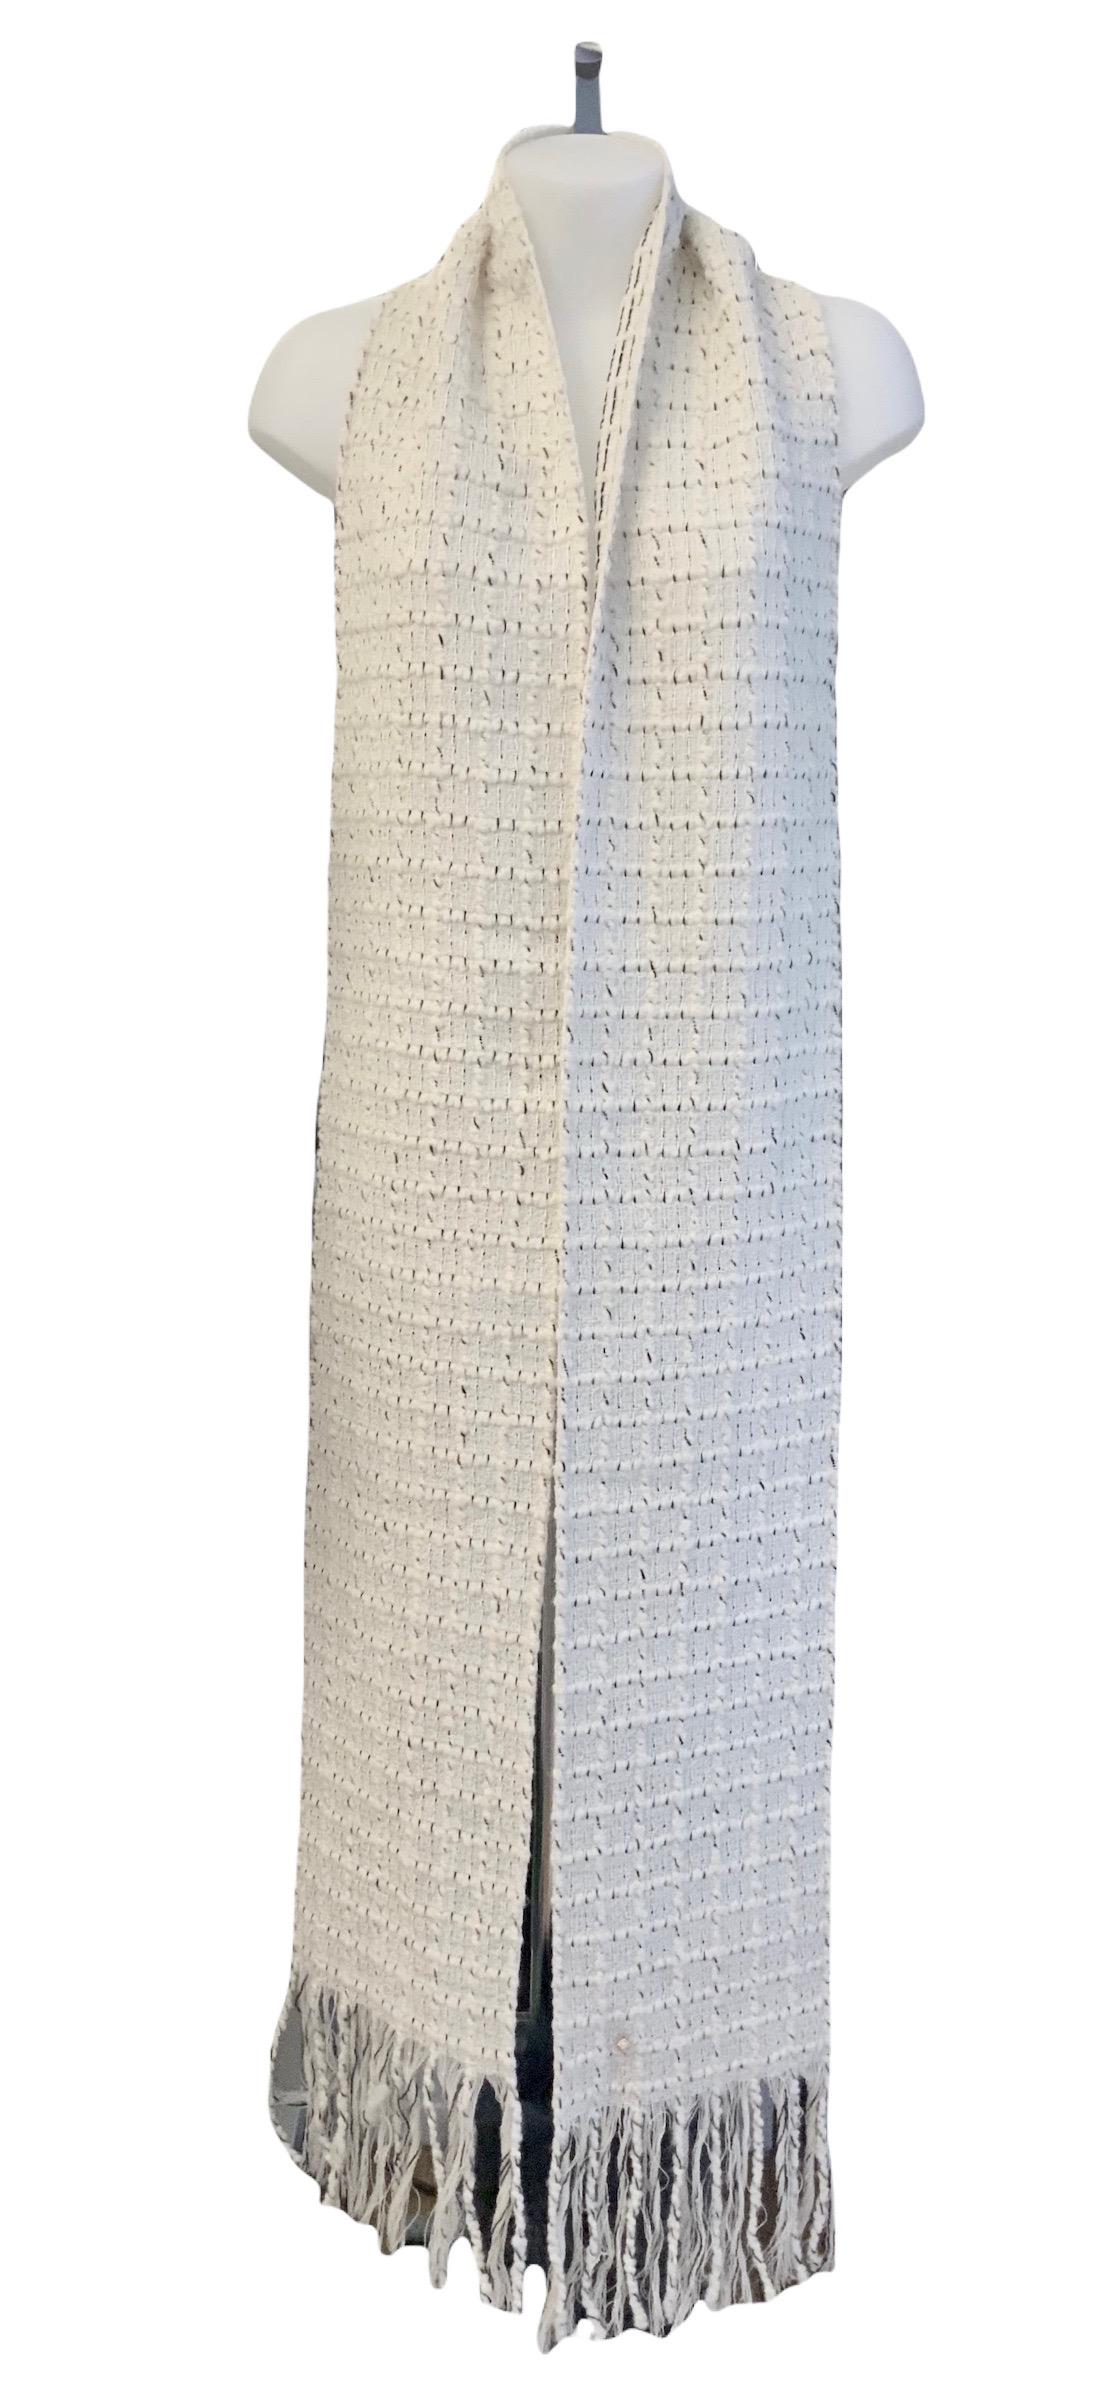 Rare long stole from the house of Chanel. It is made of a beautiful off-white wool tweed with black thread details.

Year: 2017
Material: 90% wool, 4% nylon, 3% polyester, 3% acrylic
Color: off-white
Measurements: 
Length: 260 cms - approx. 100